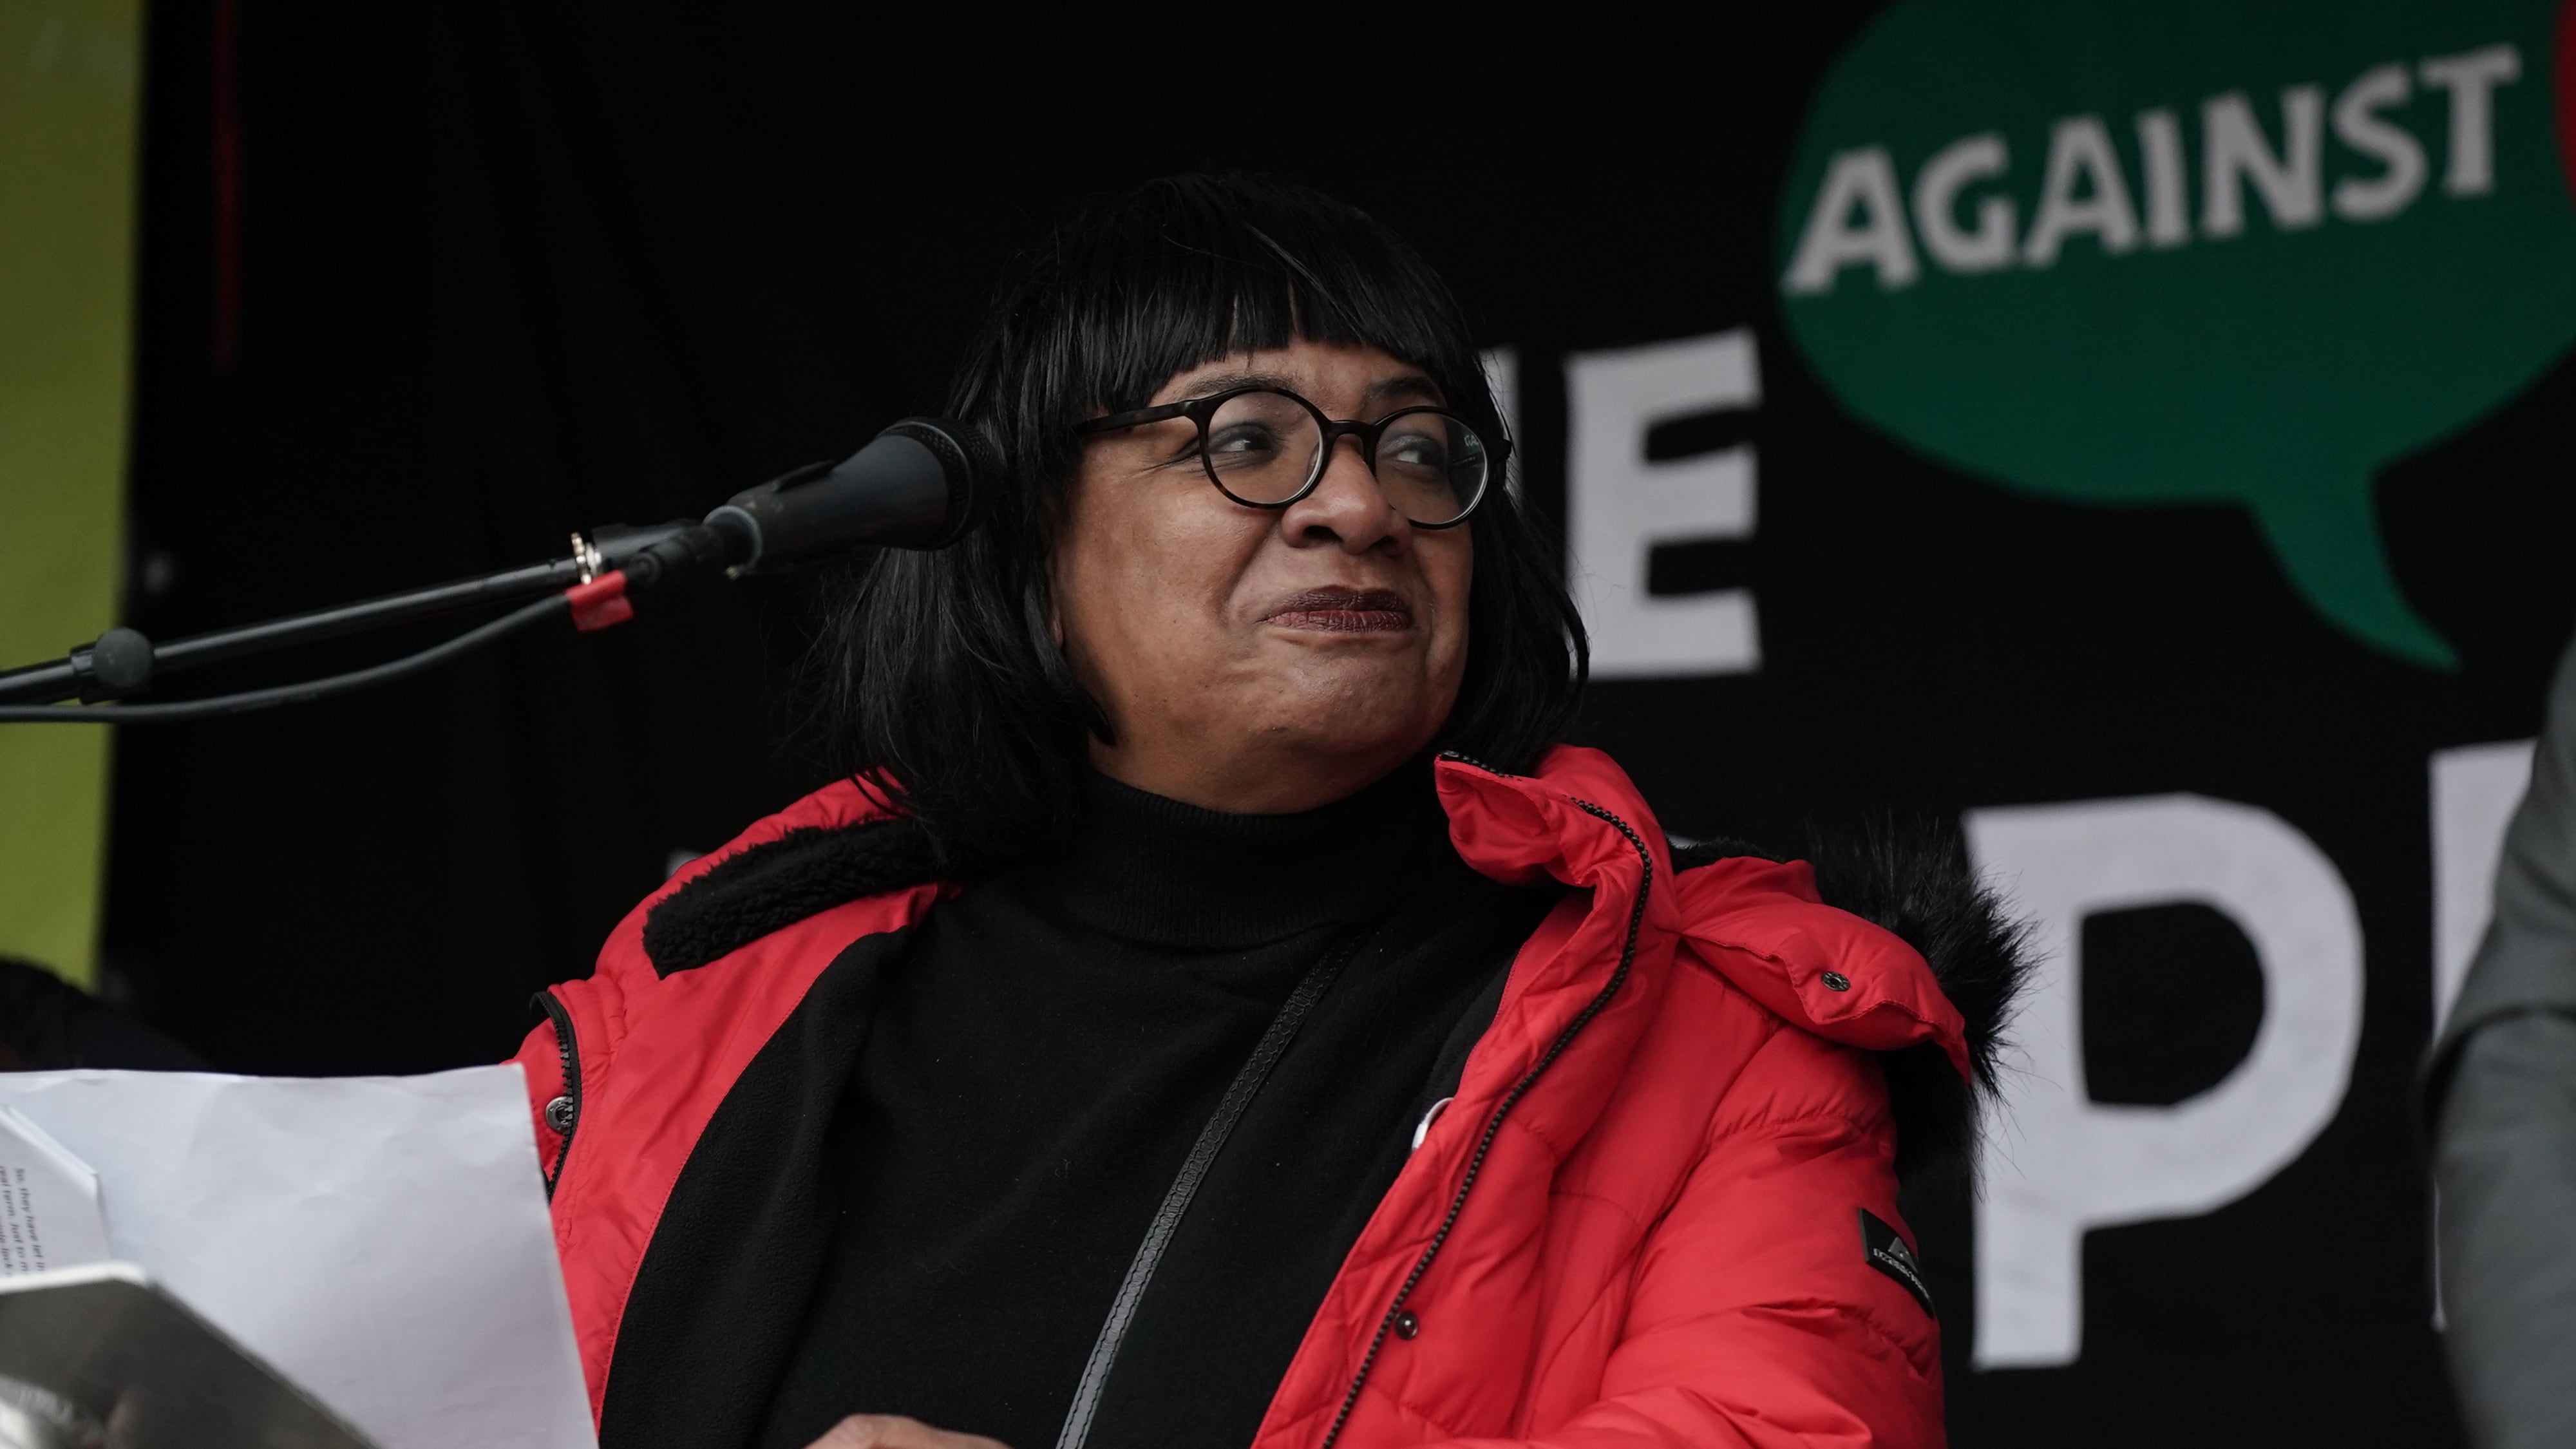 Veteran MP Diane Abbott had the Labour whip restored on Tuesday, but she claims she has been barred from standing in the General Election